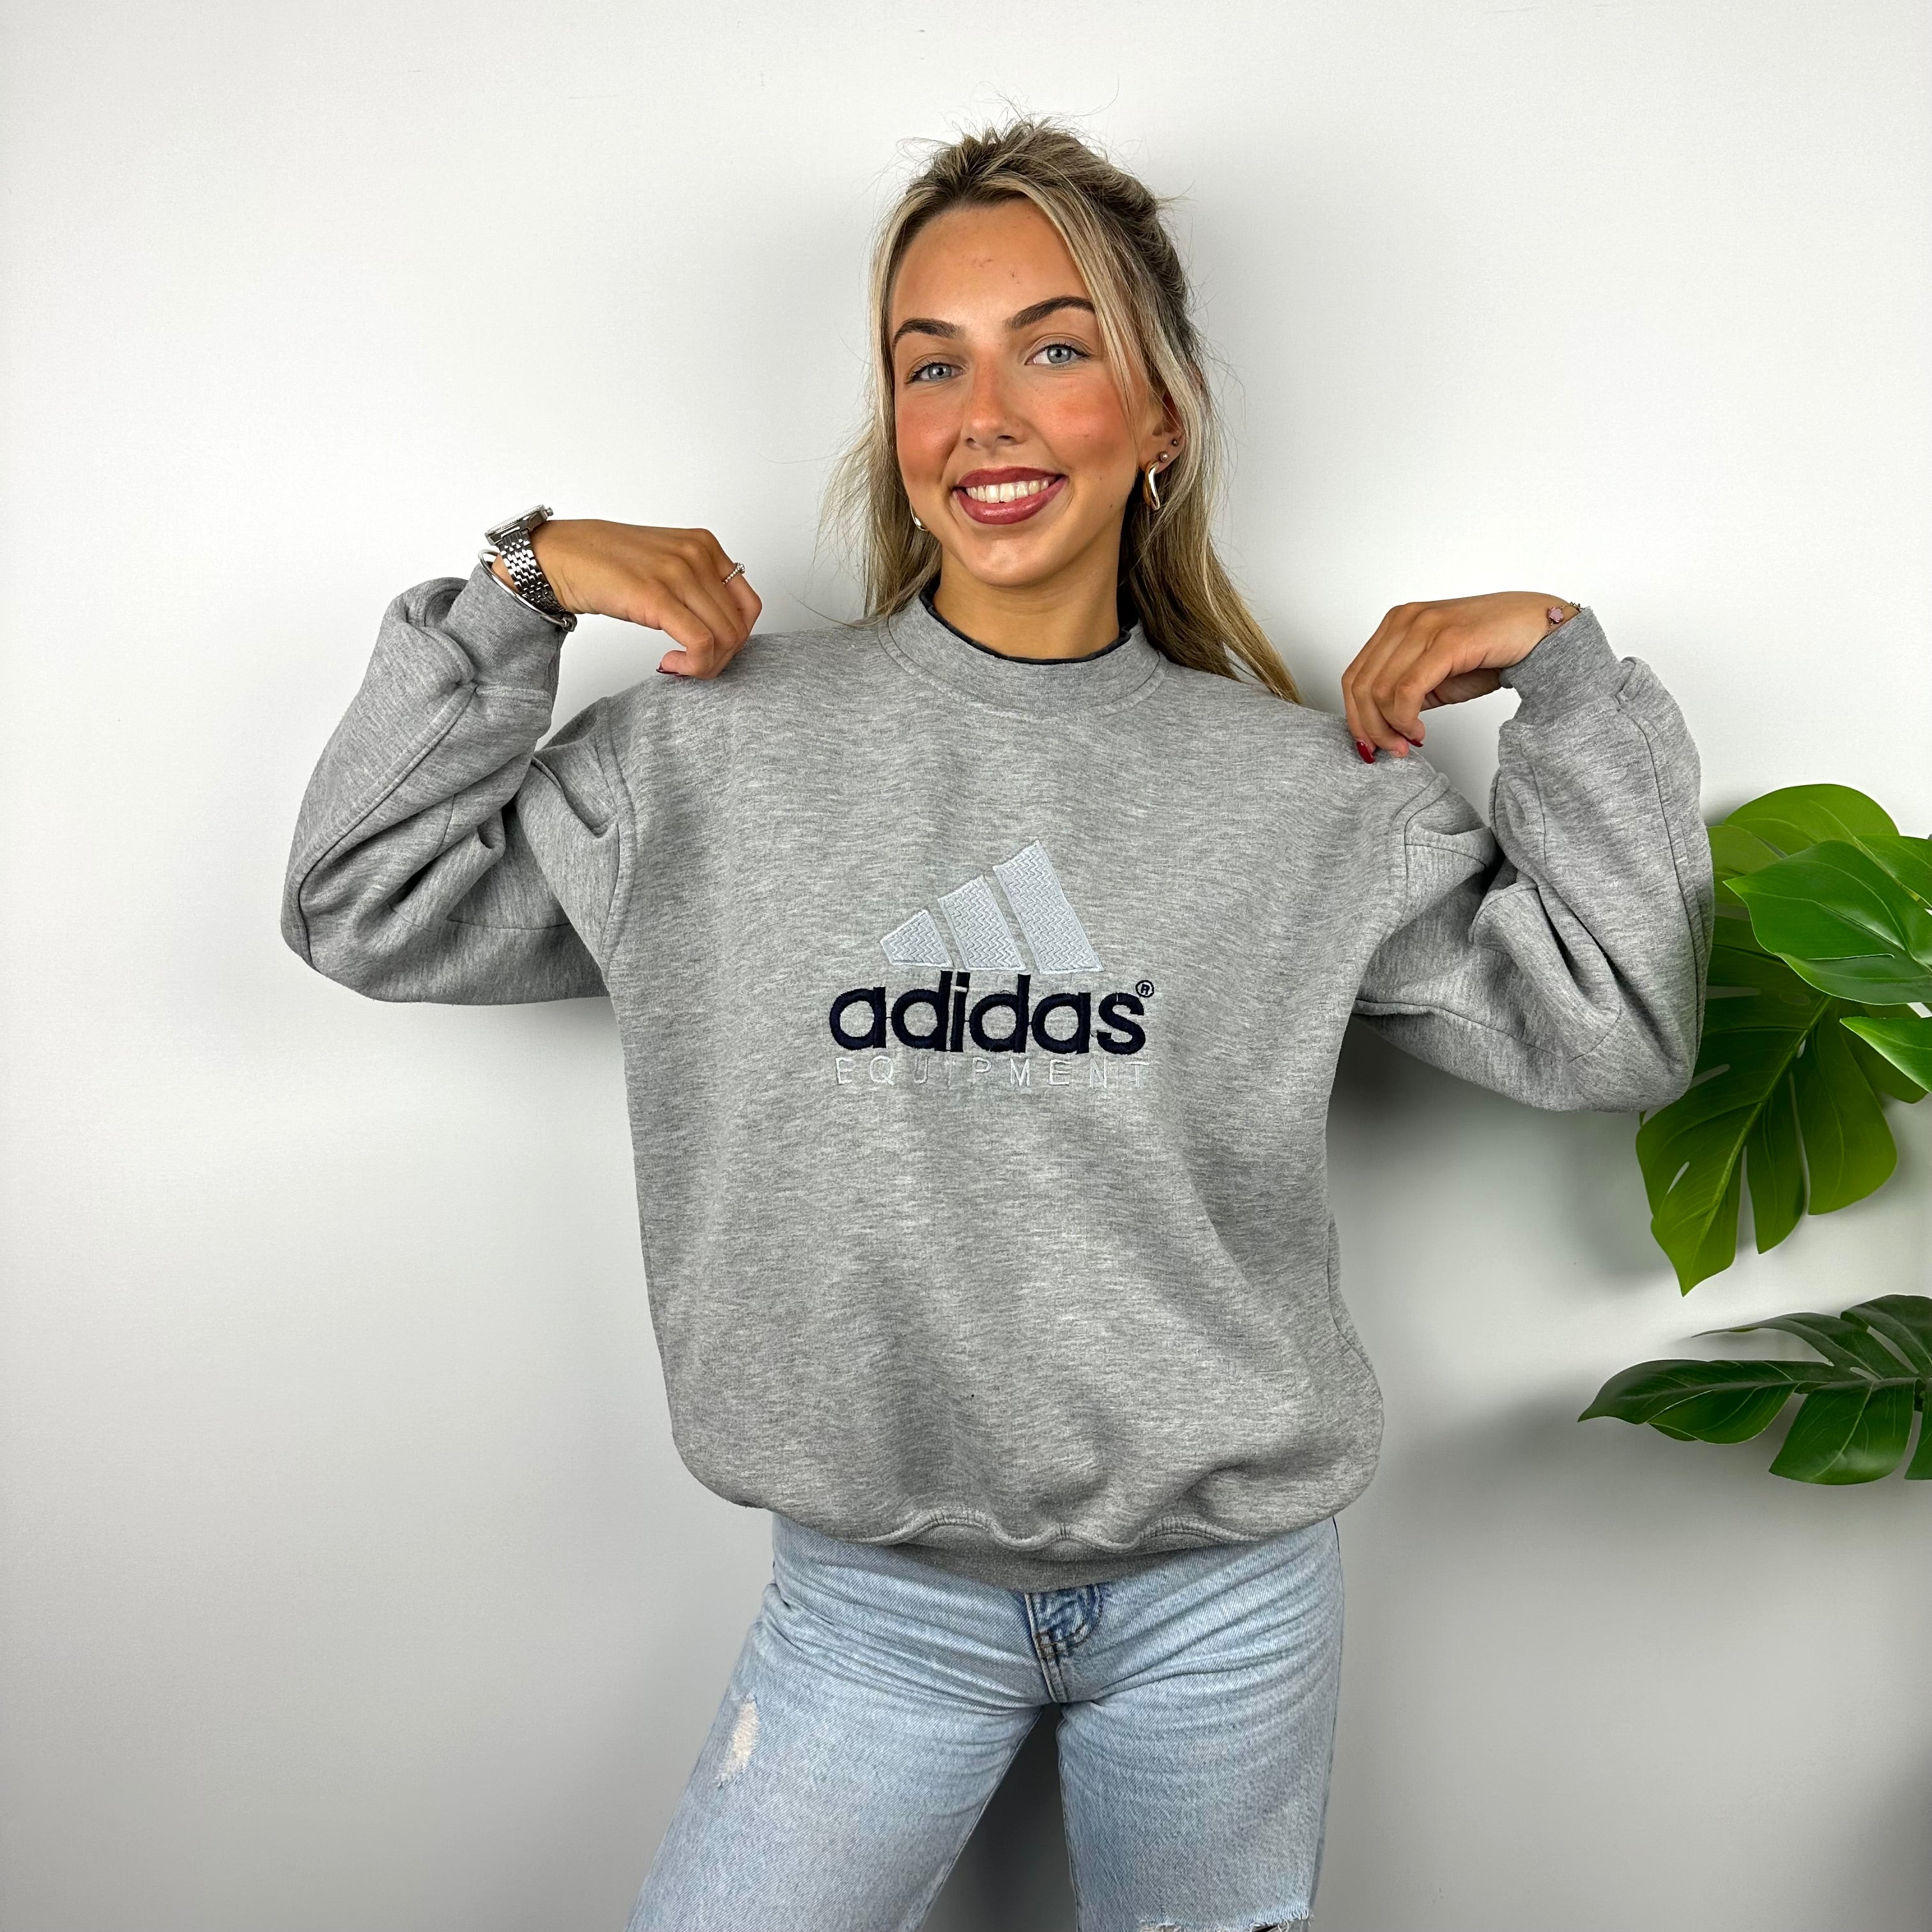 Adidas Equipment RARE Grey Embroidered Spell Out Sweatshirt (M)